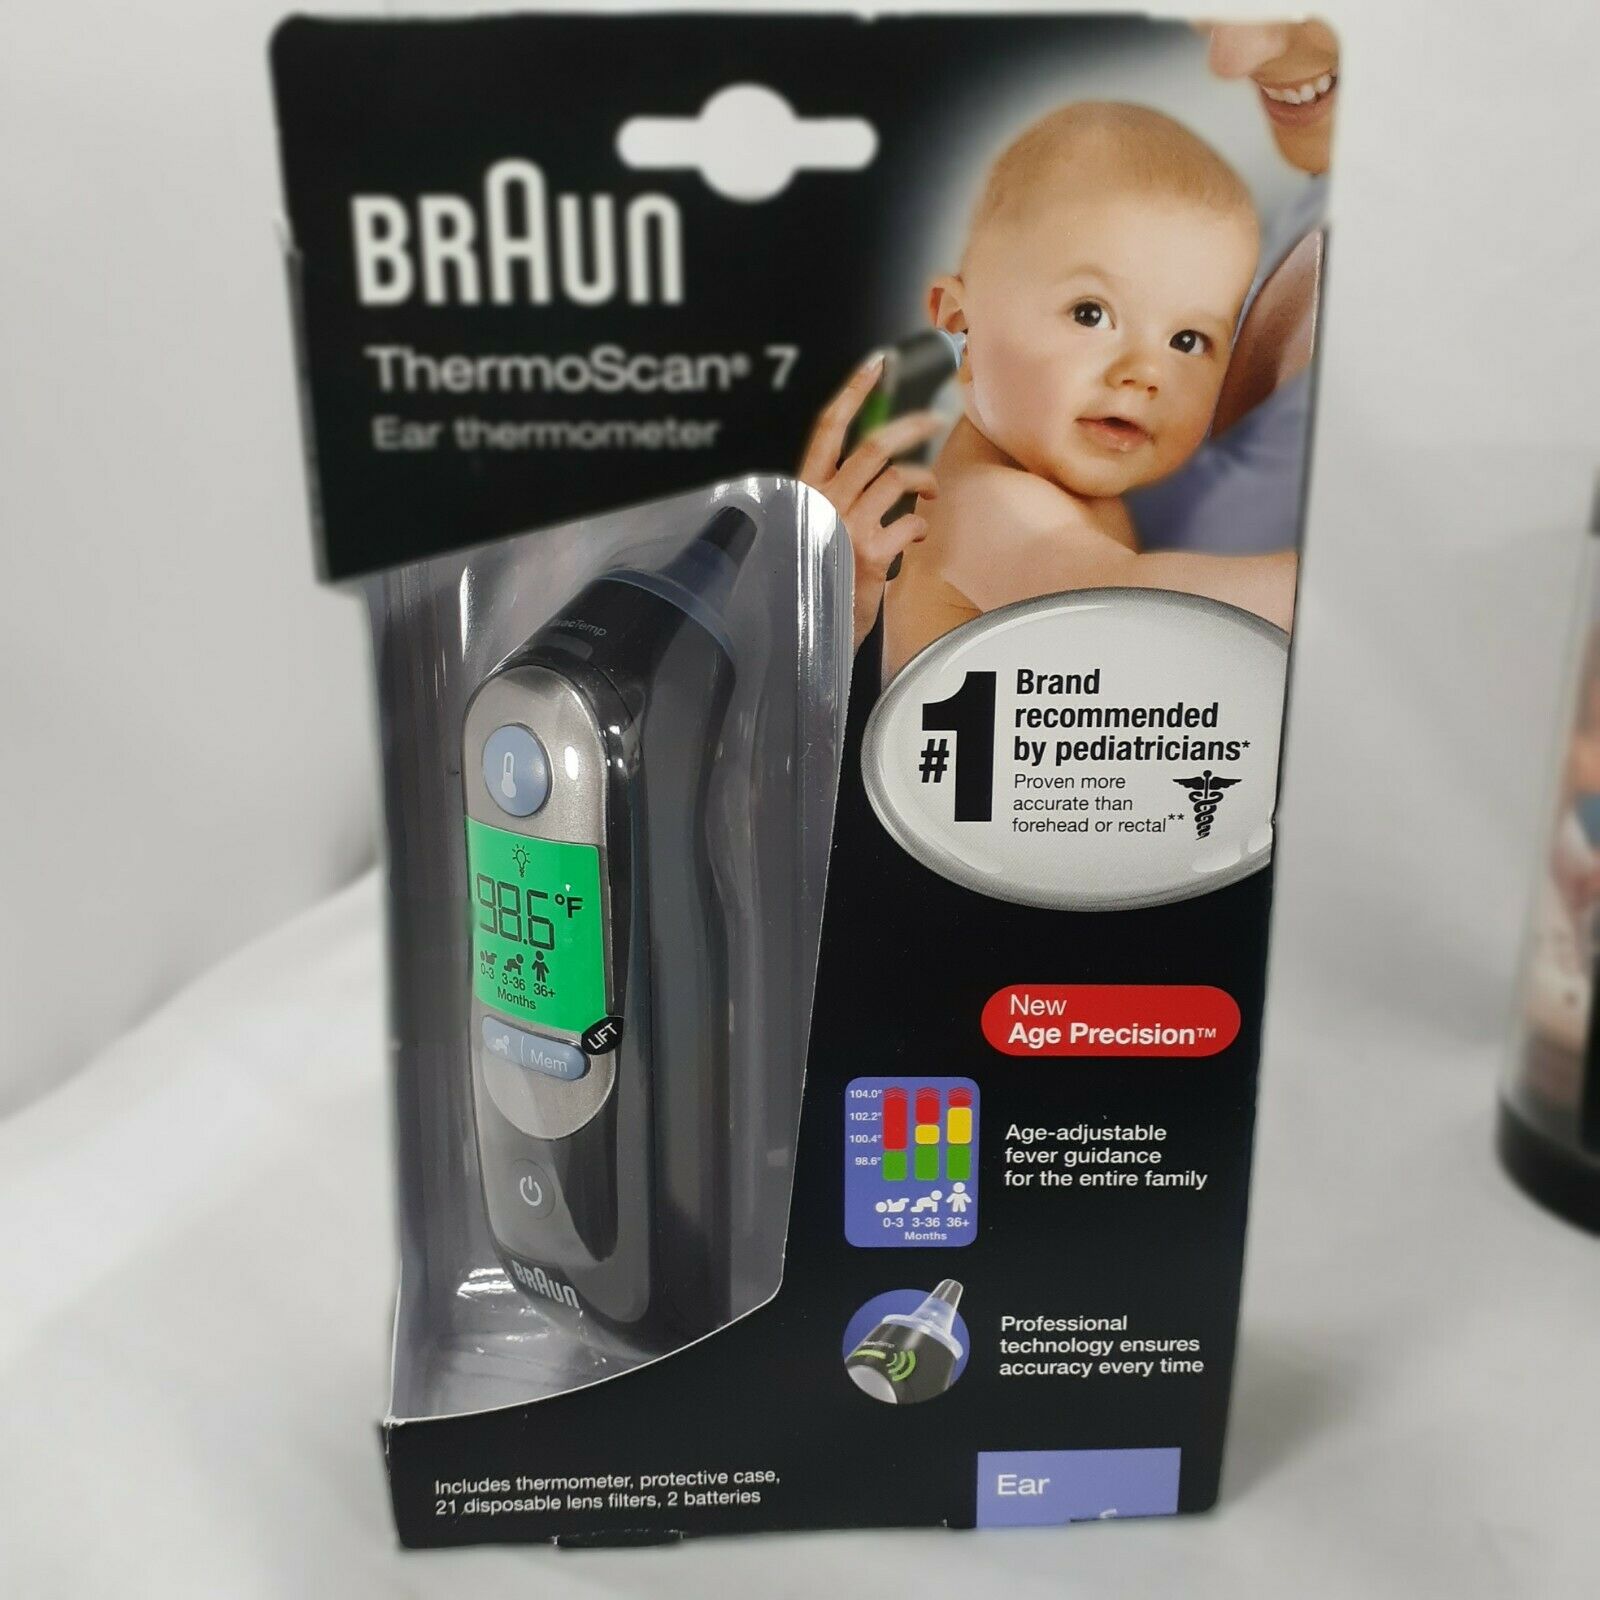 Braun Thermoscan 7 IRT 6520 Digital Ear Thermometer New In Sealed Box